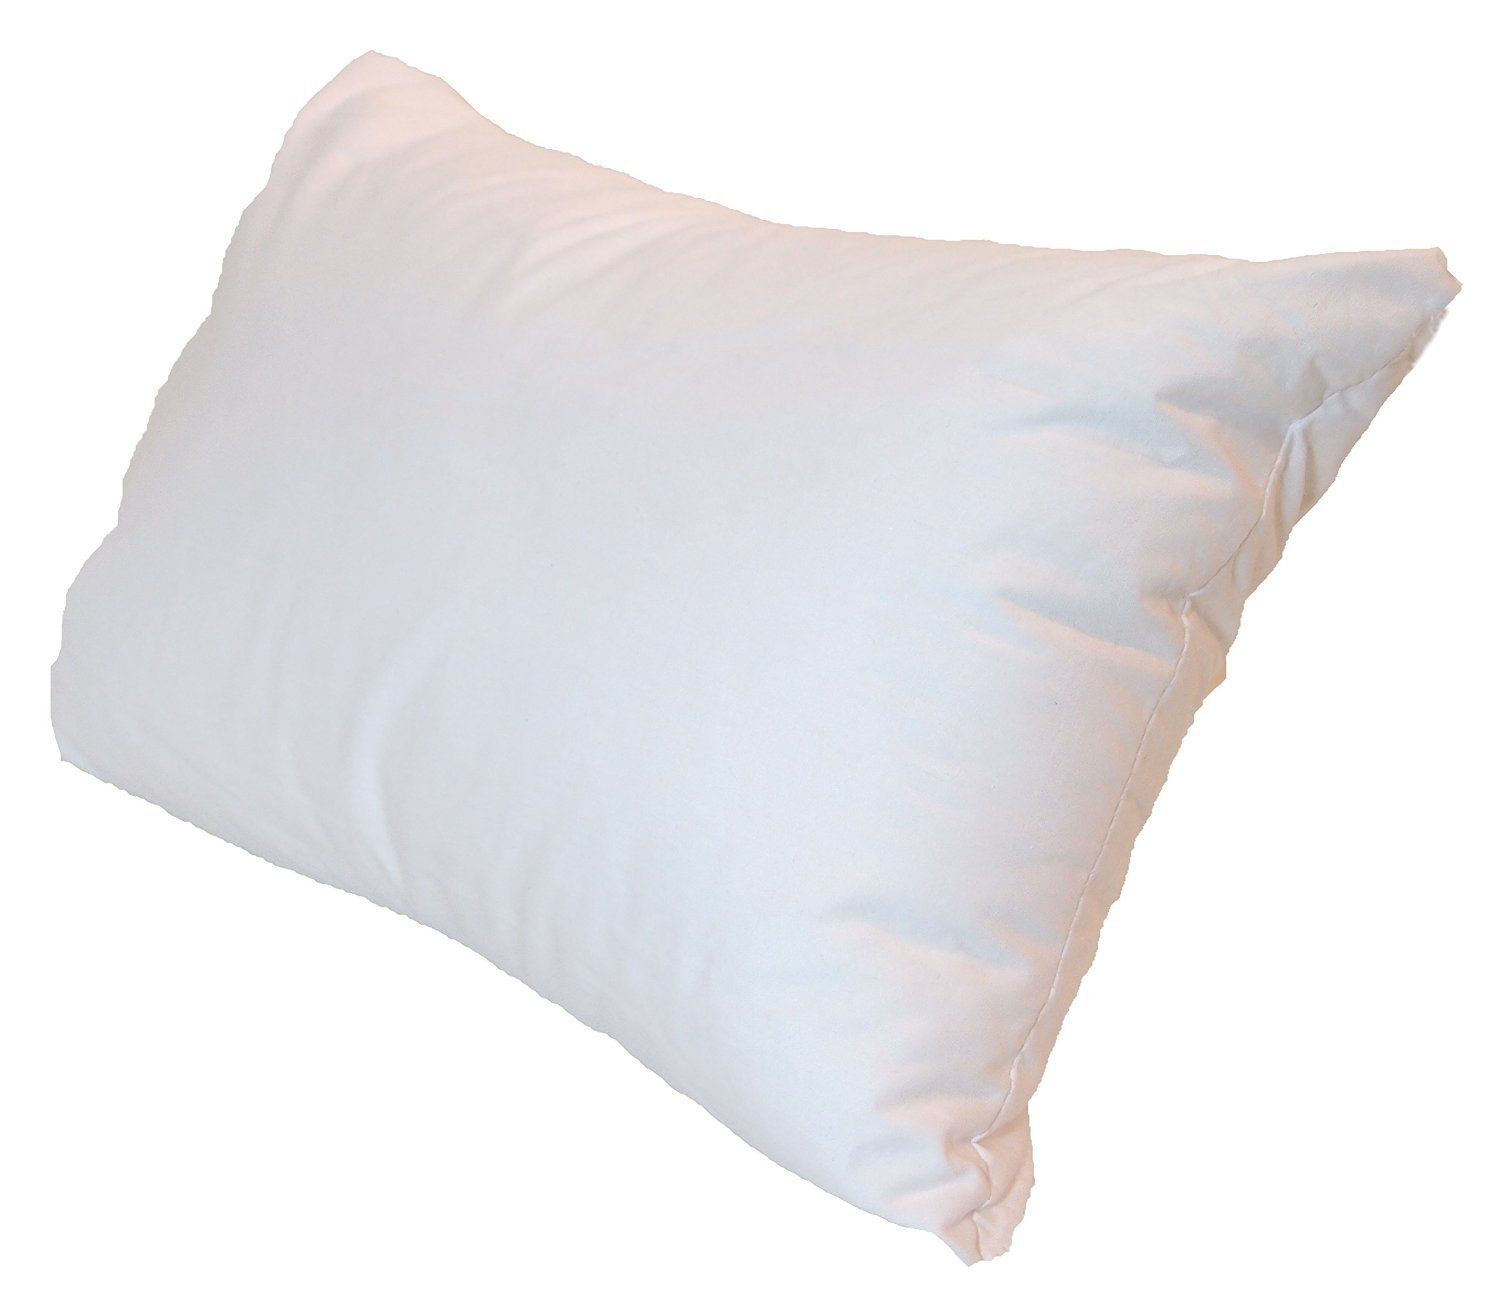 PP18 Hobbs Polydown Pillow Insert 18 (Pillow Form) shipping included*